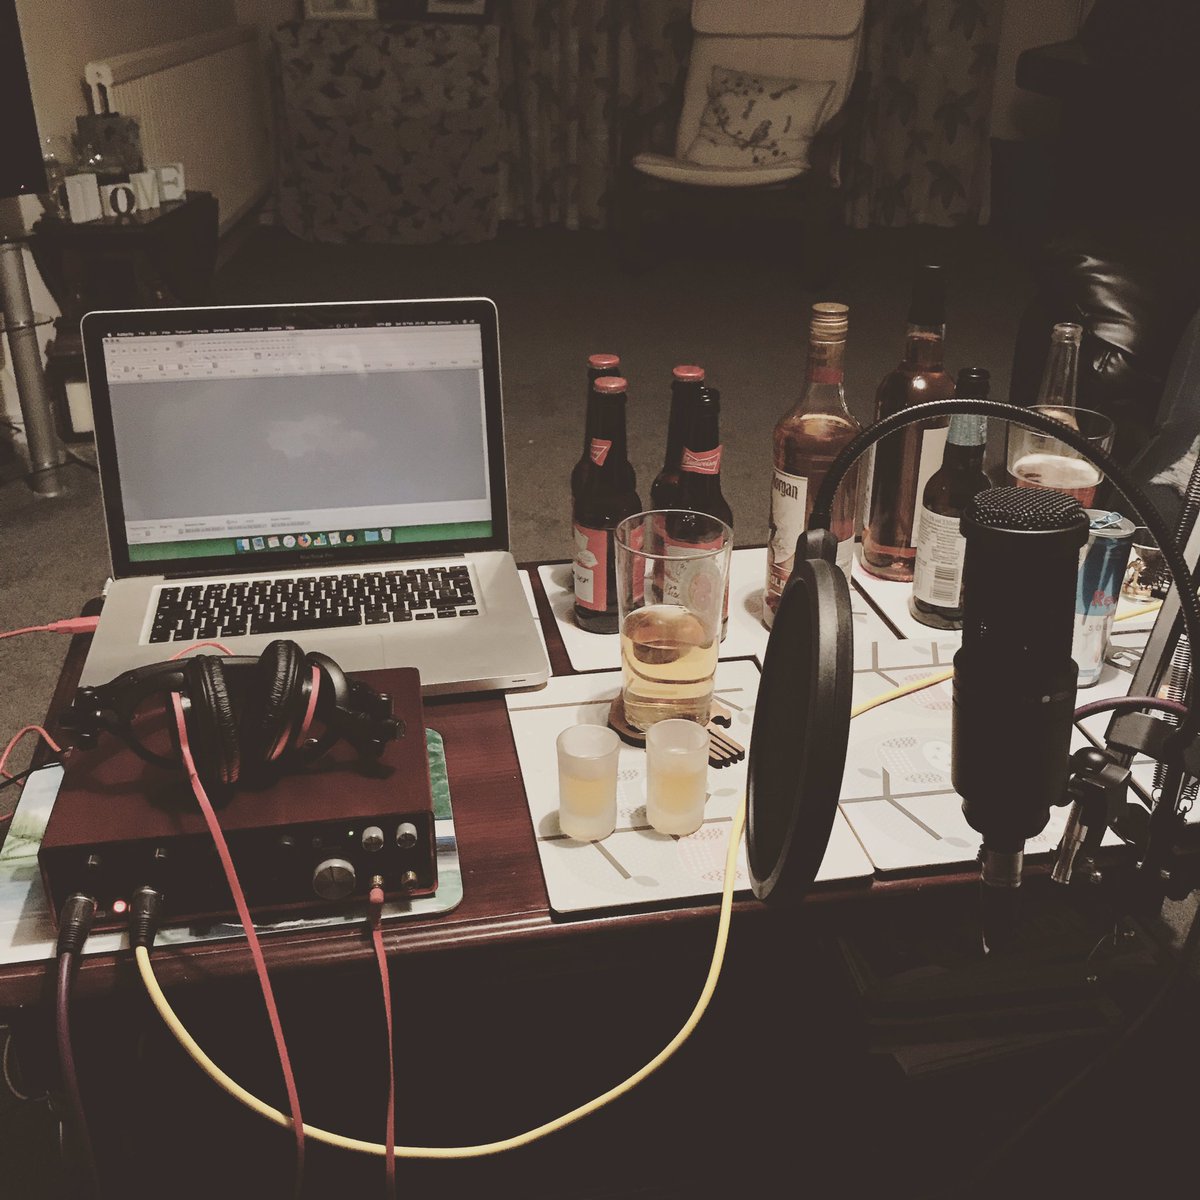 Getting back in the saddle🦄
#podcast #drunkpodcast #ukpodcast #podcasting #drunk